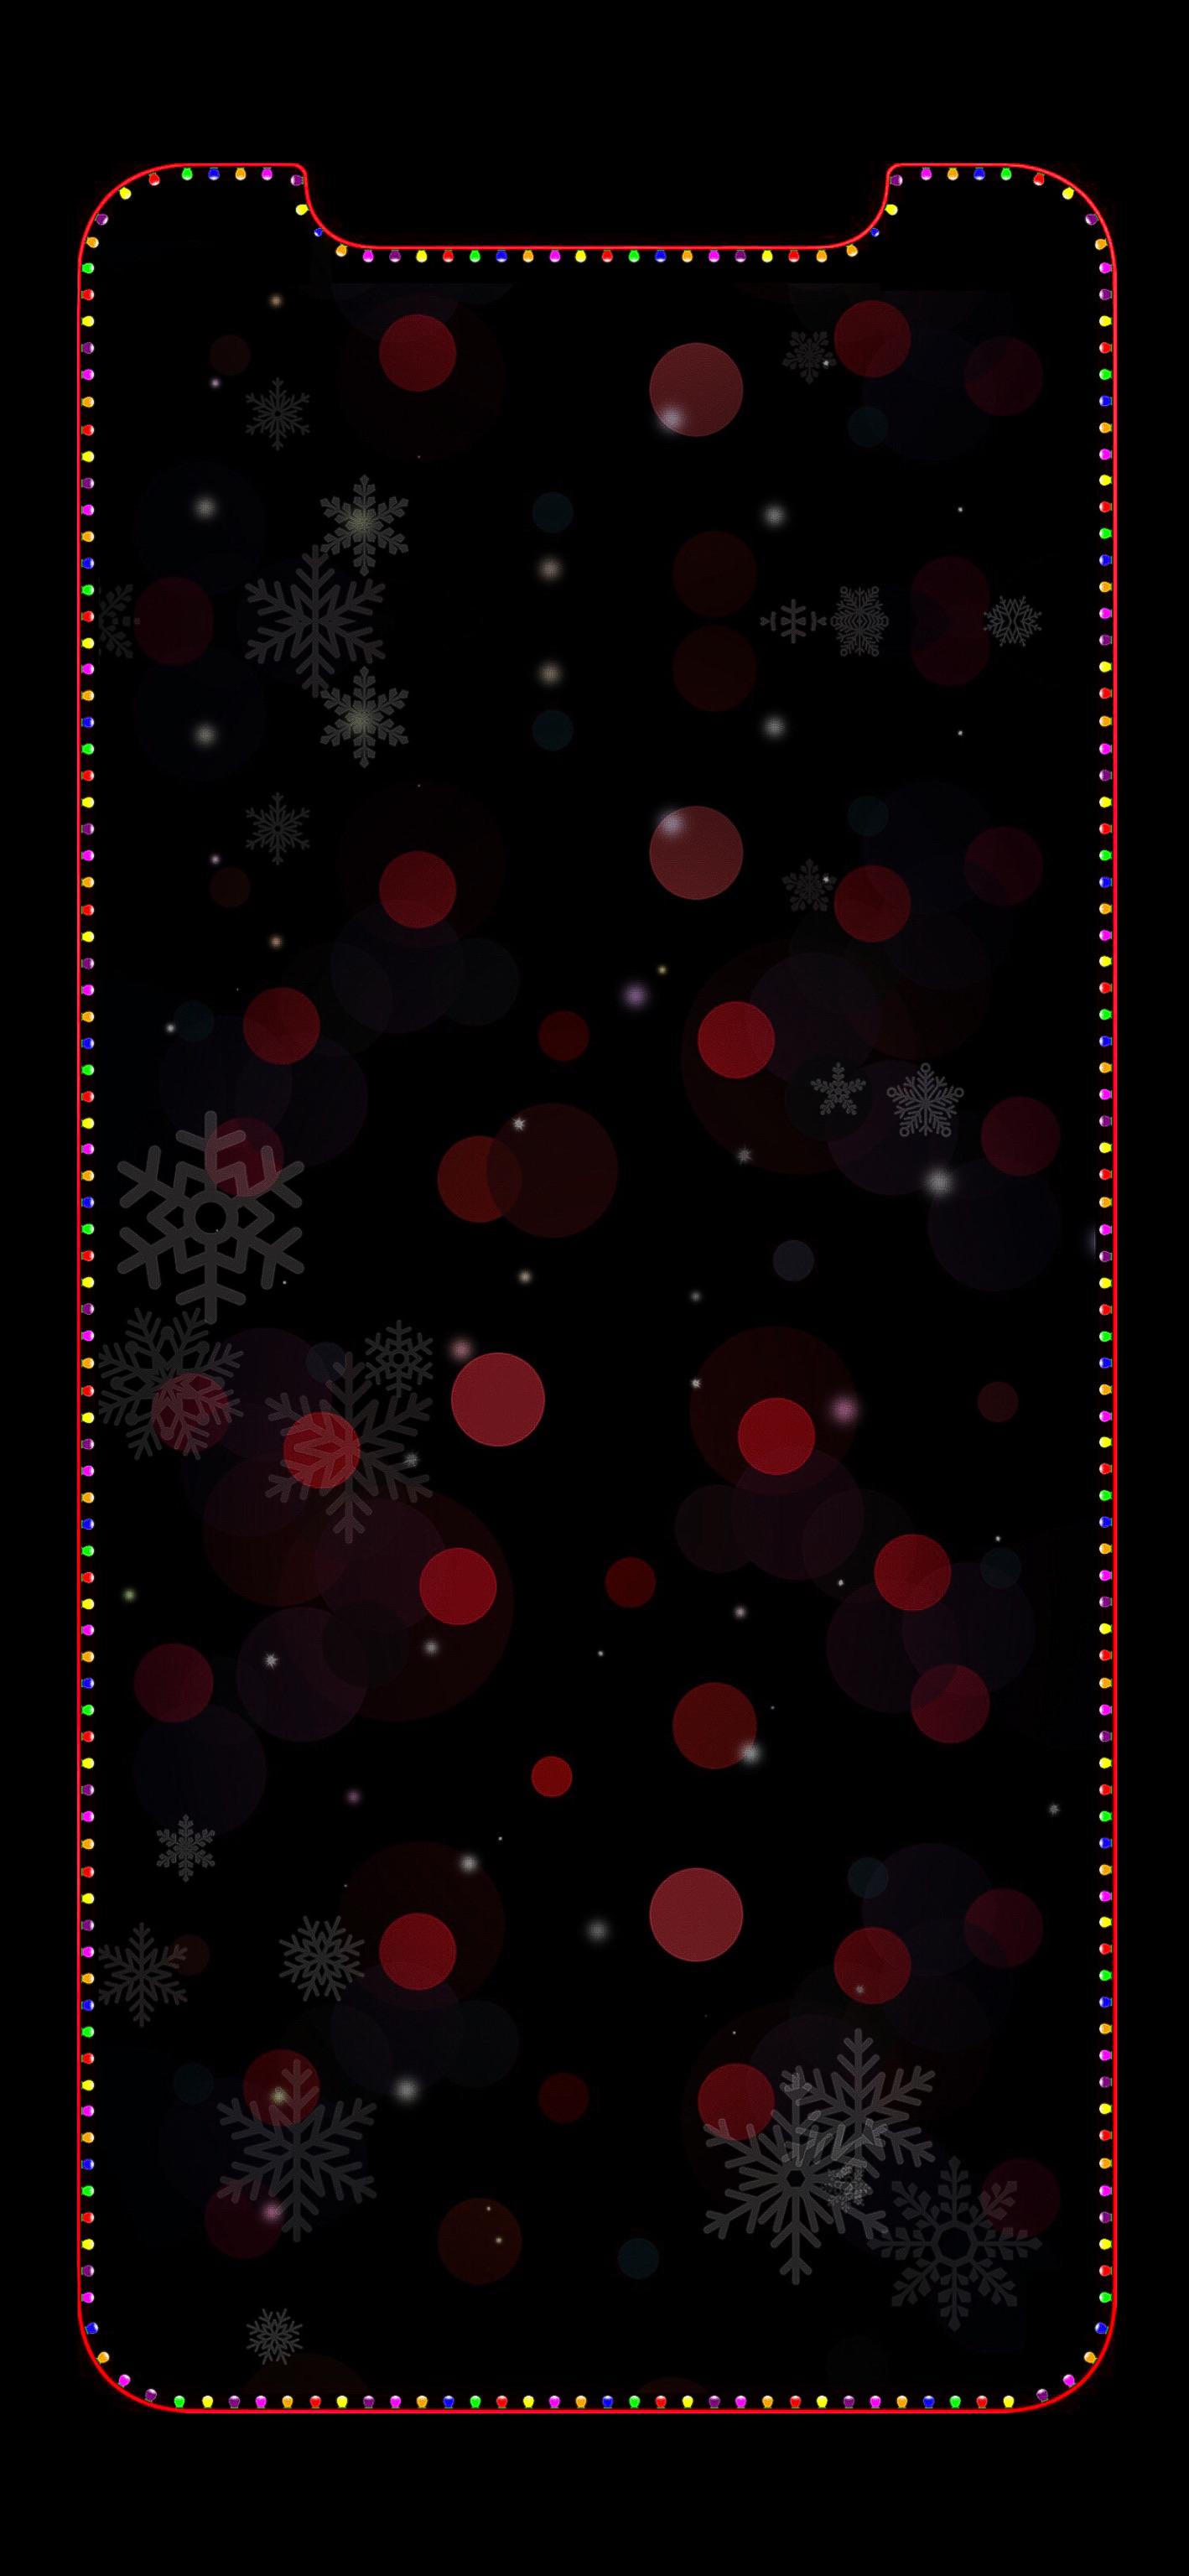 Great Christmas wallpaper (link in comments)